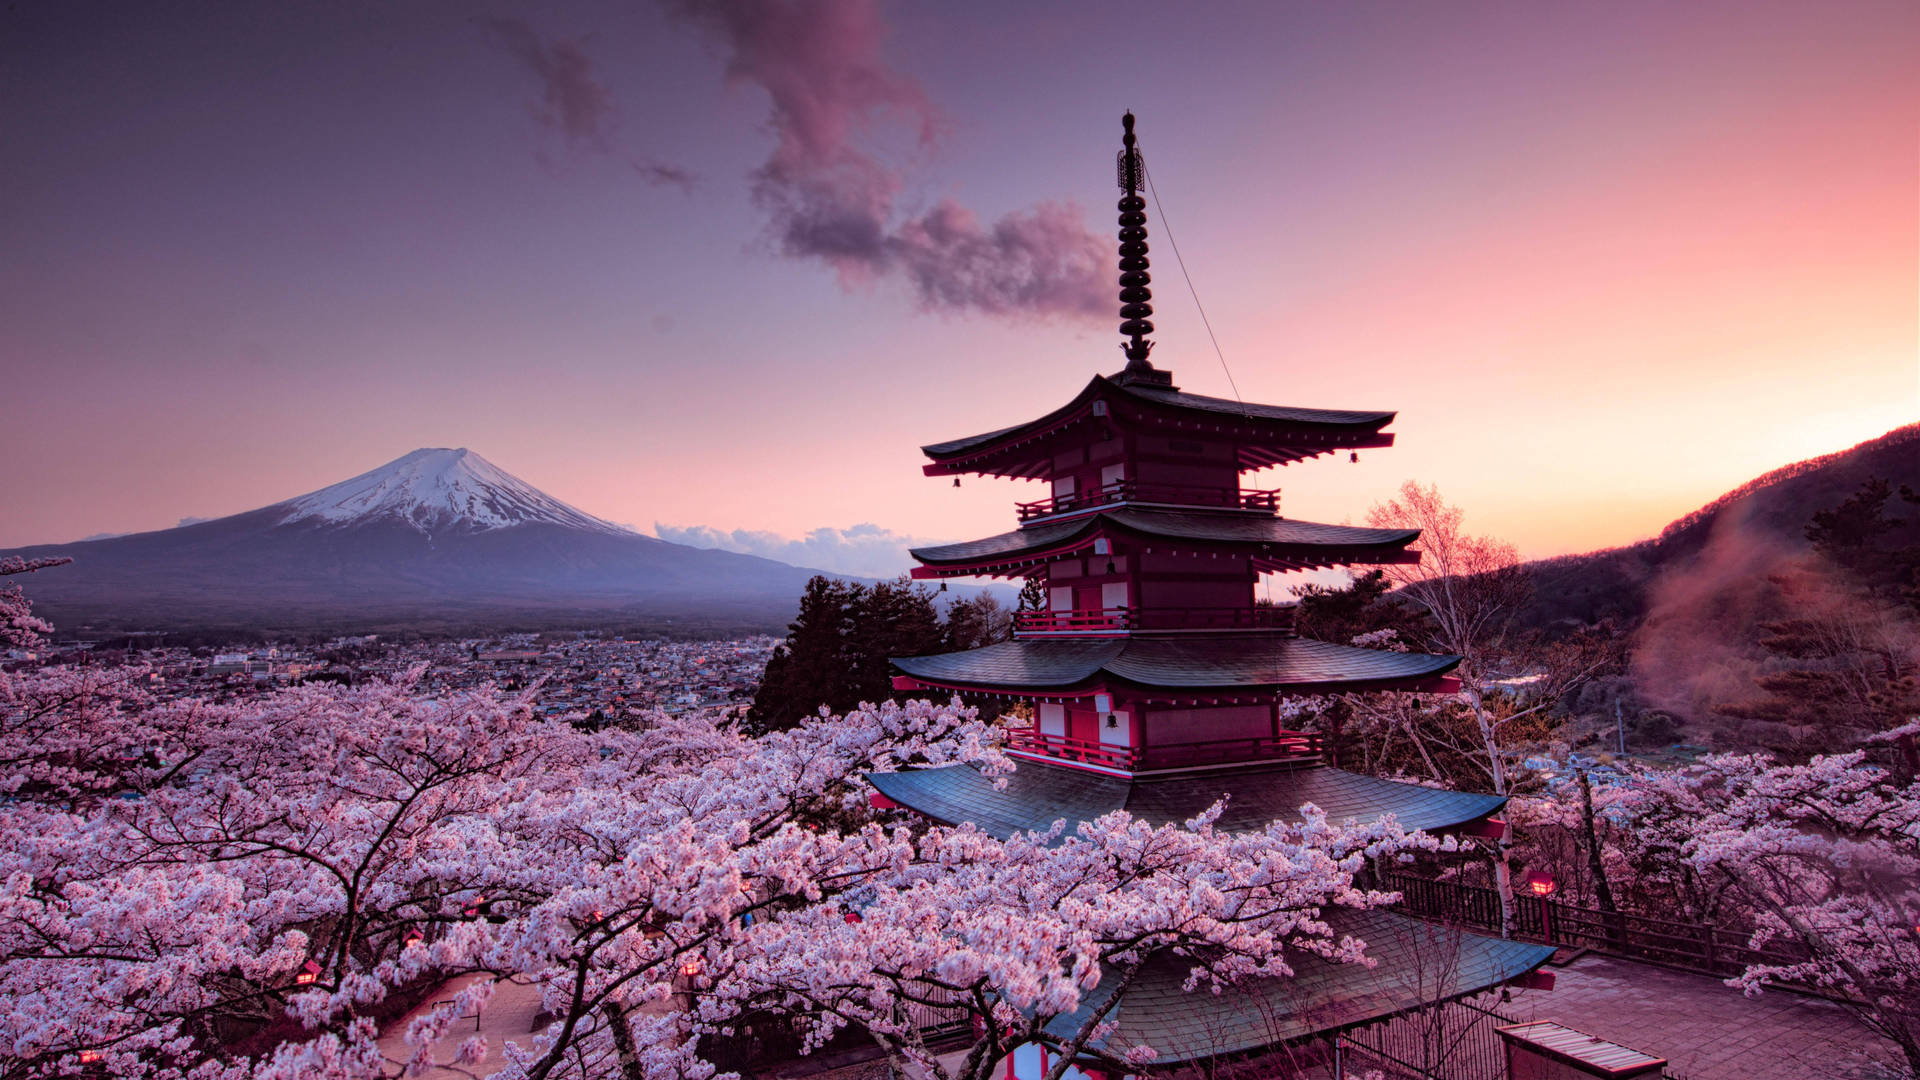 A Breathtaking View Of A Japanese Cherry Blossom In Full Bloom Wallpaper